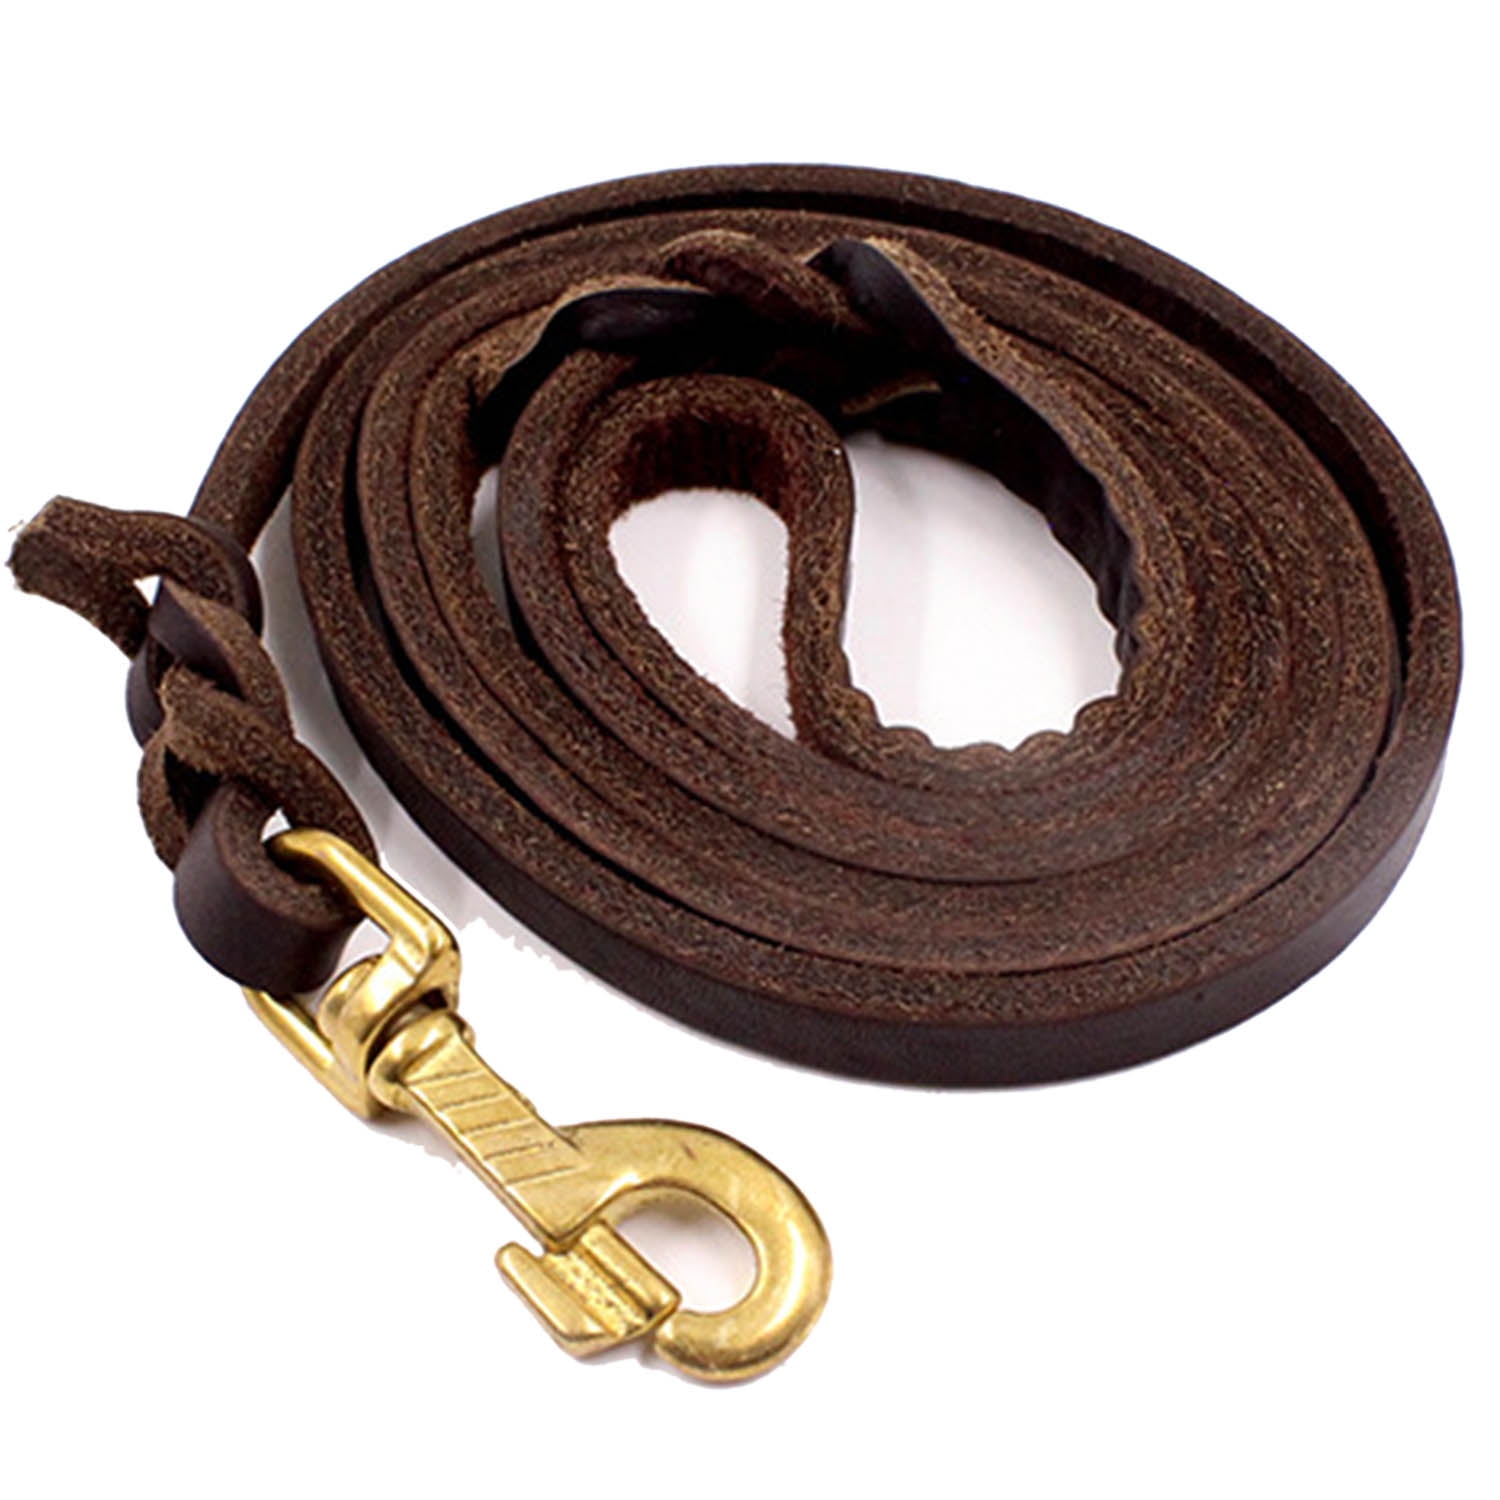 New Genuine Leather Dog Leash 3M/9.8 Ft long 1/2" wide for Medium and Large Dogs 